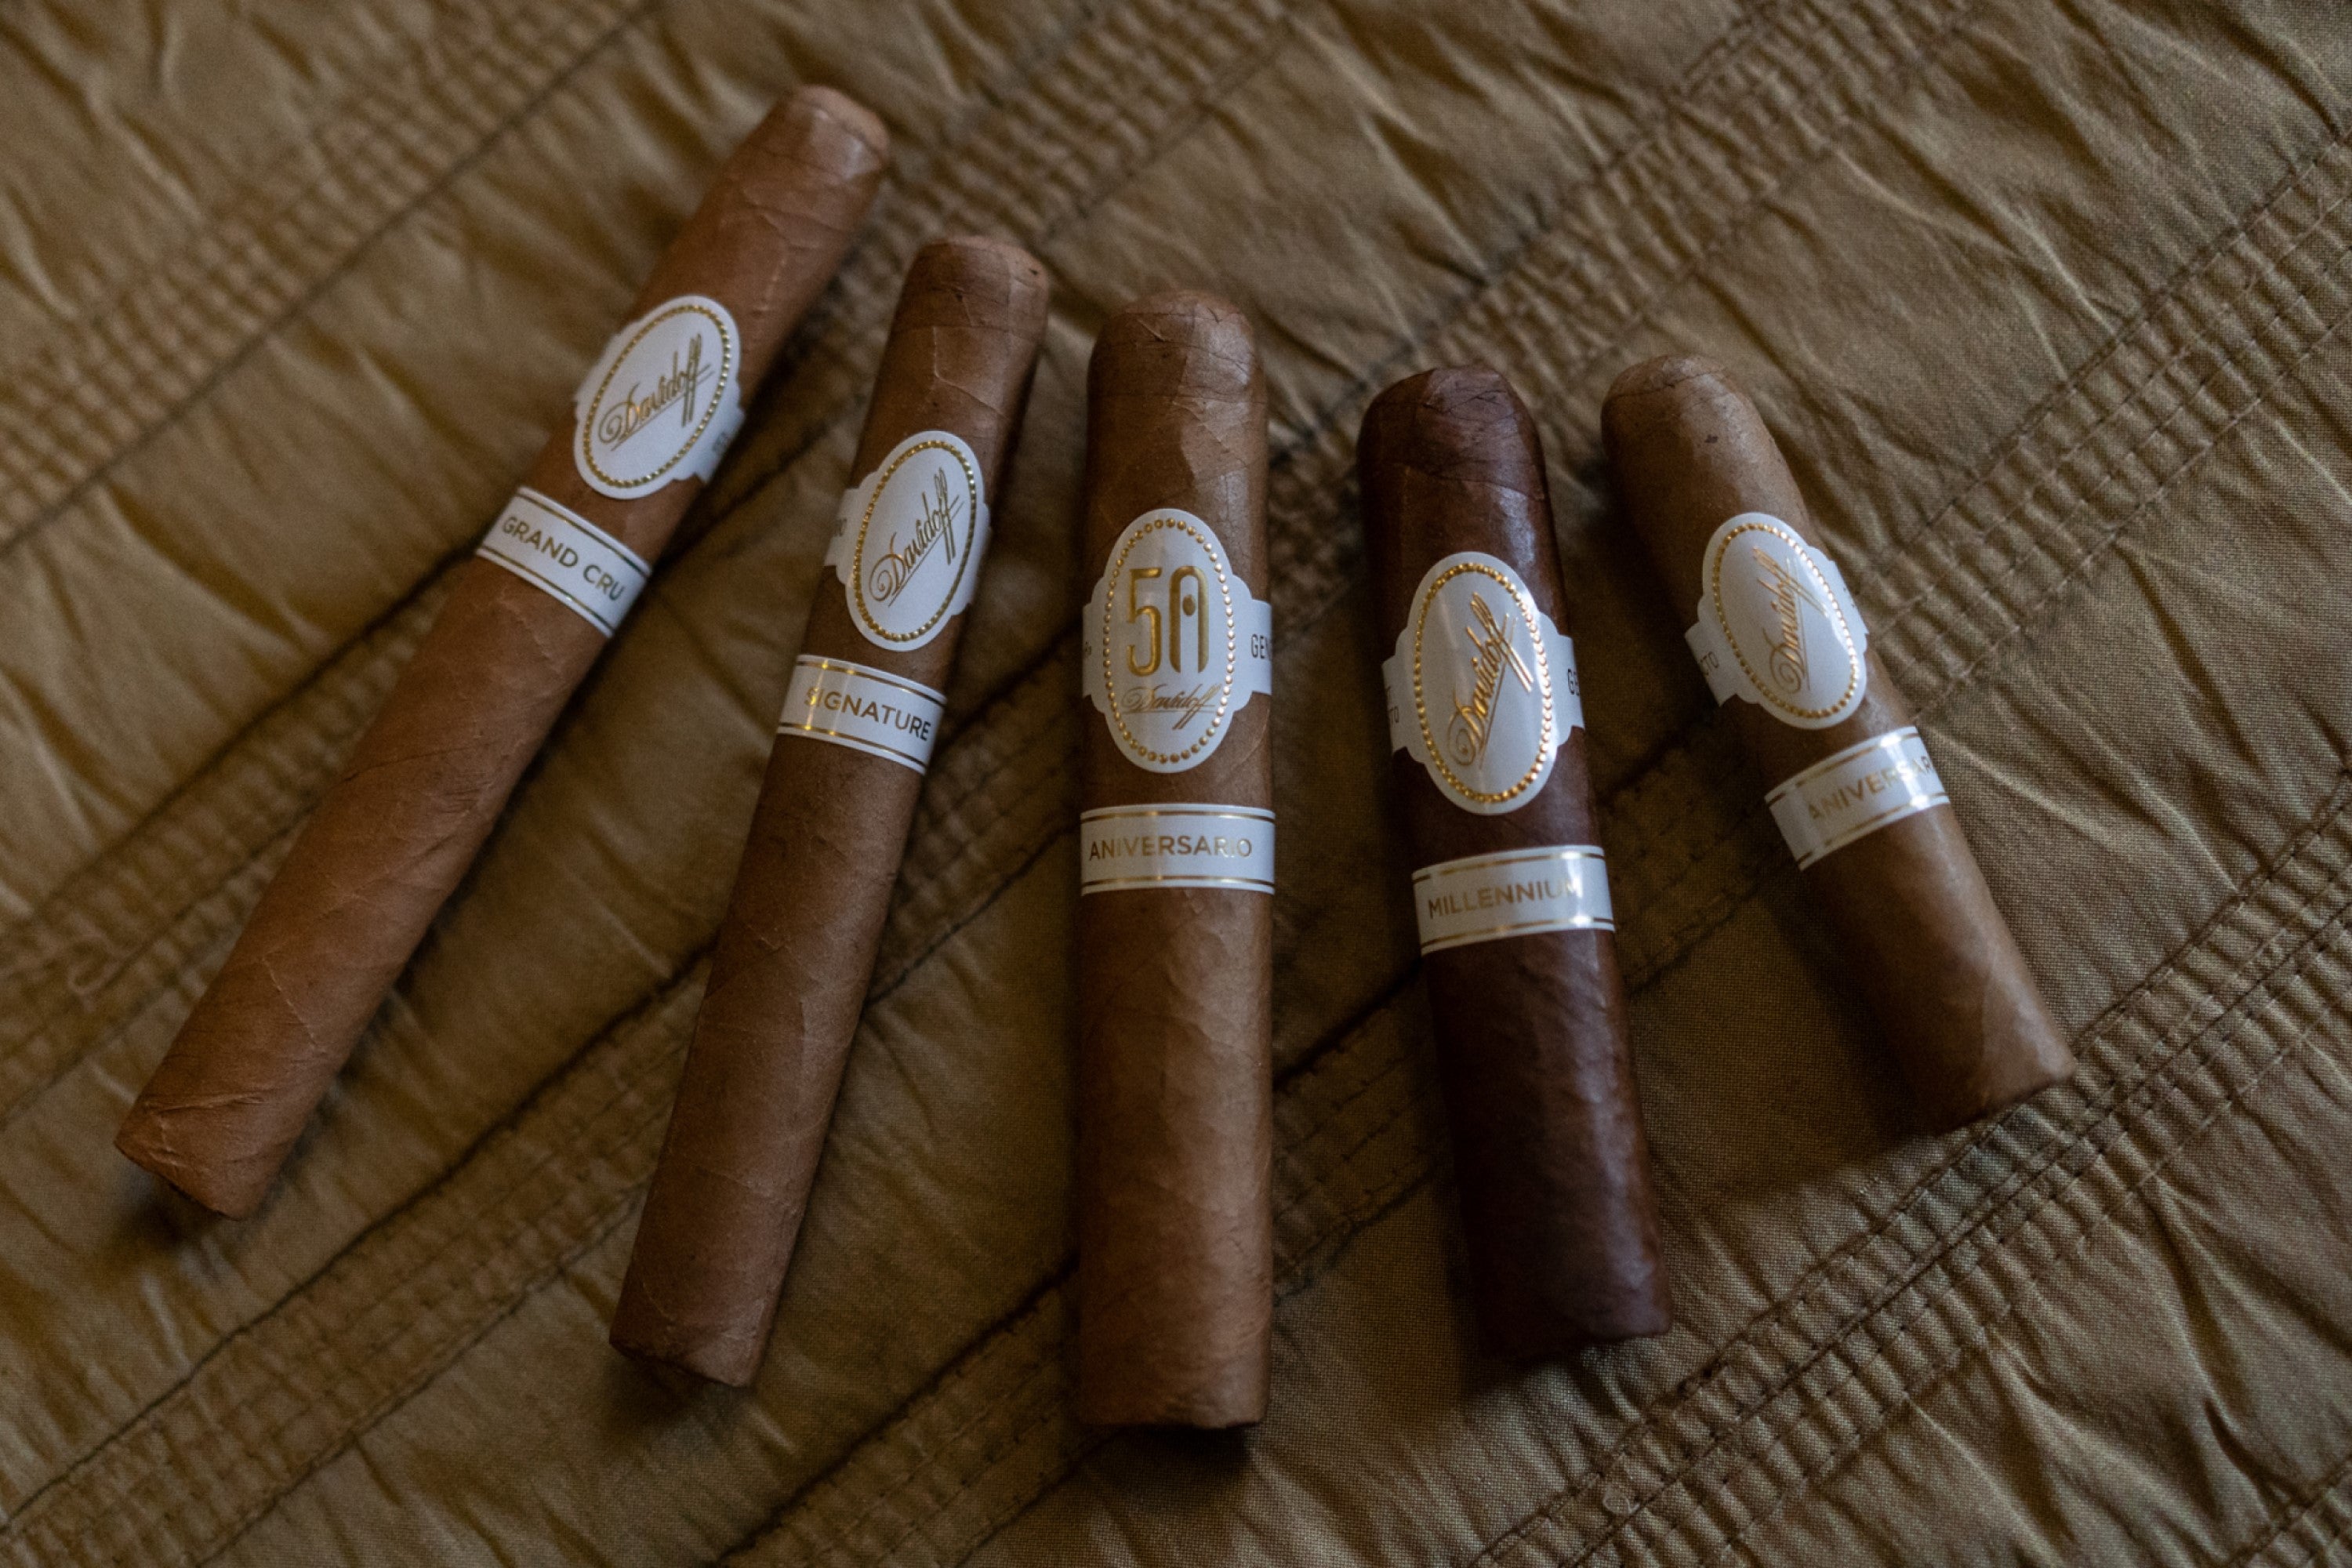 A selection of Dominican cigars from Davidoff